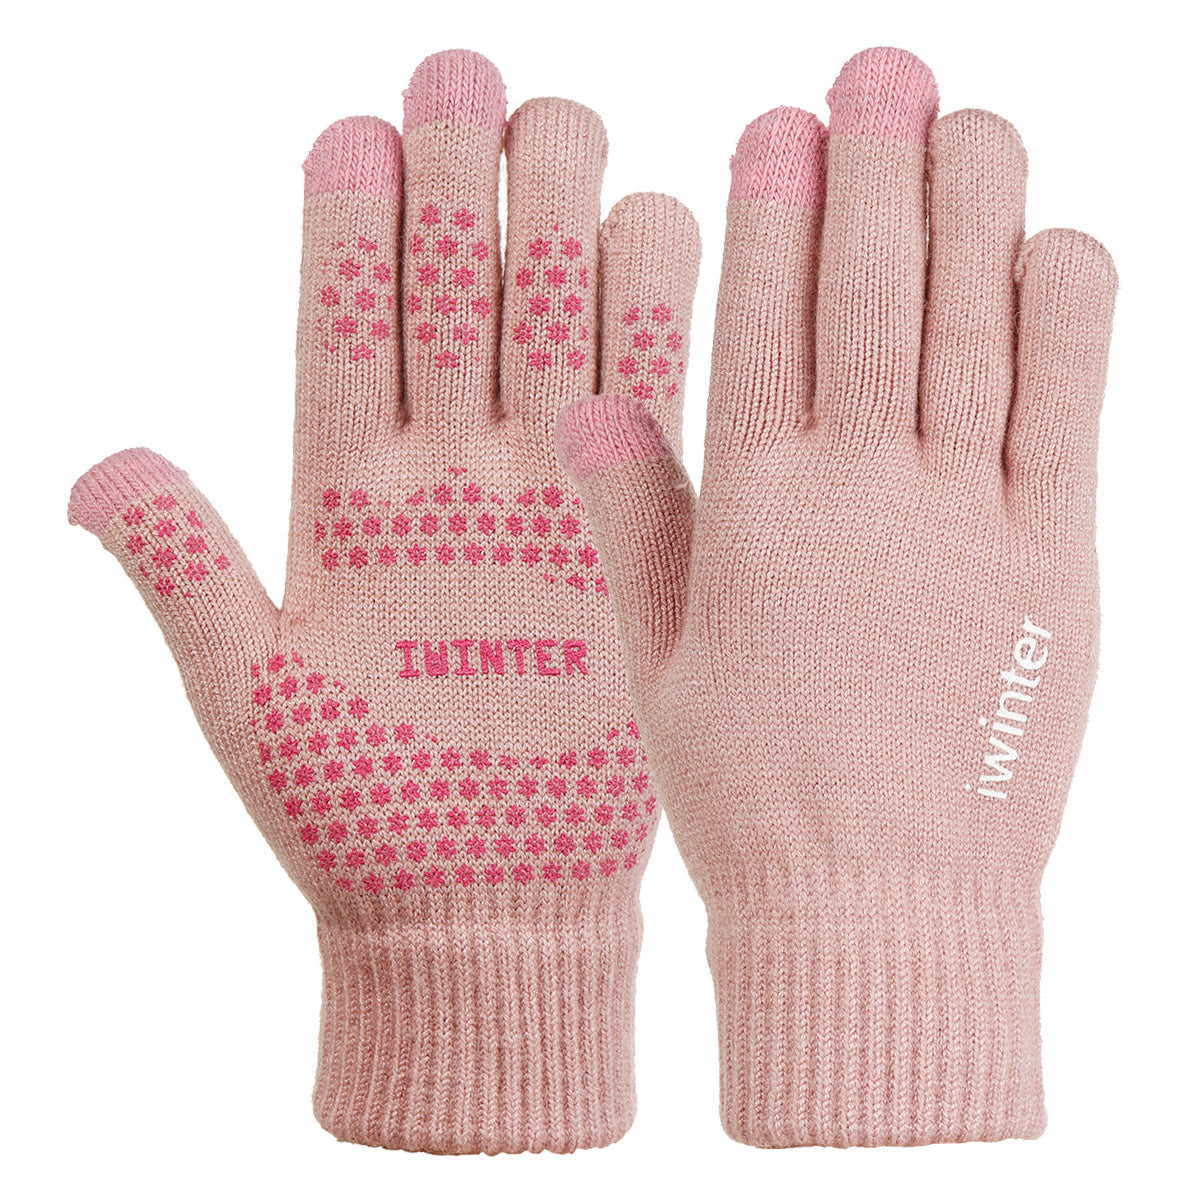 Rosy Brown Knitted Touch Screen Outdoor Gloves Motorcycle Winter Warm Windproof Fleece Lined Thermal Non-slip